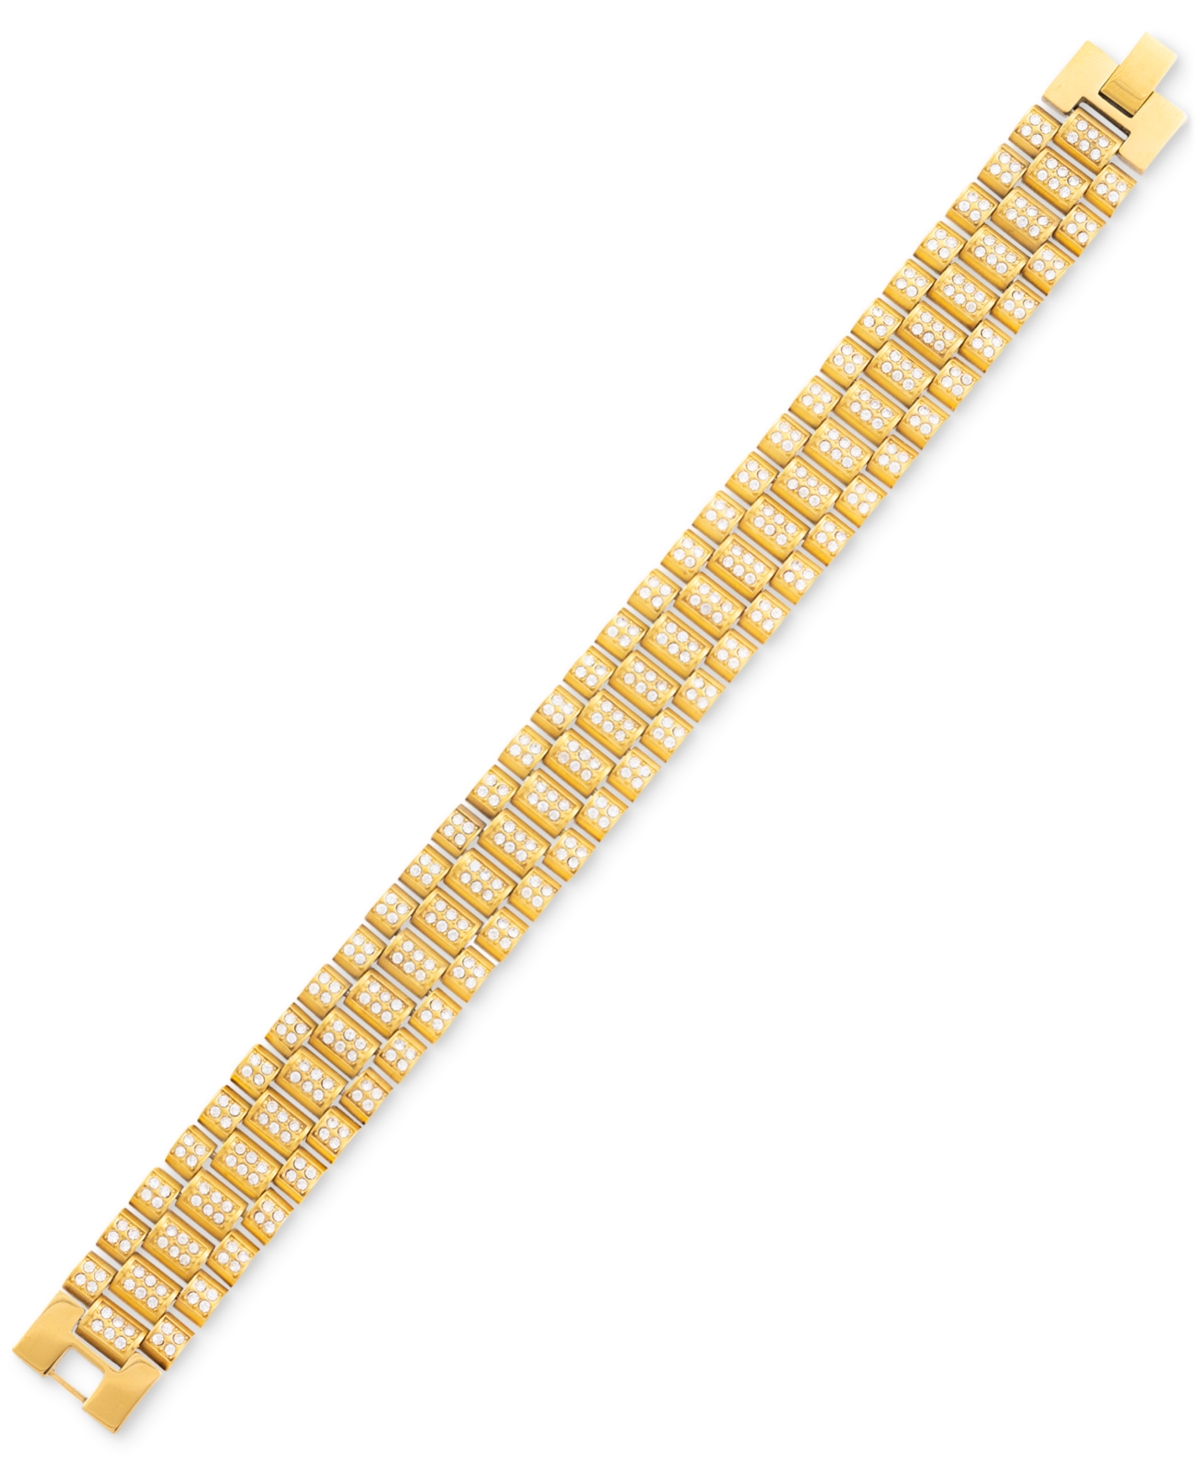 Shop Legacy For Men By Simone I. Smith Men's Crystal Watch Link Bracelet In Gold-tone Ion-plated Stainless Steel